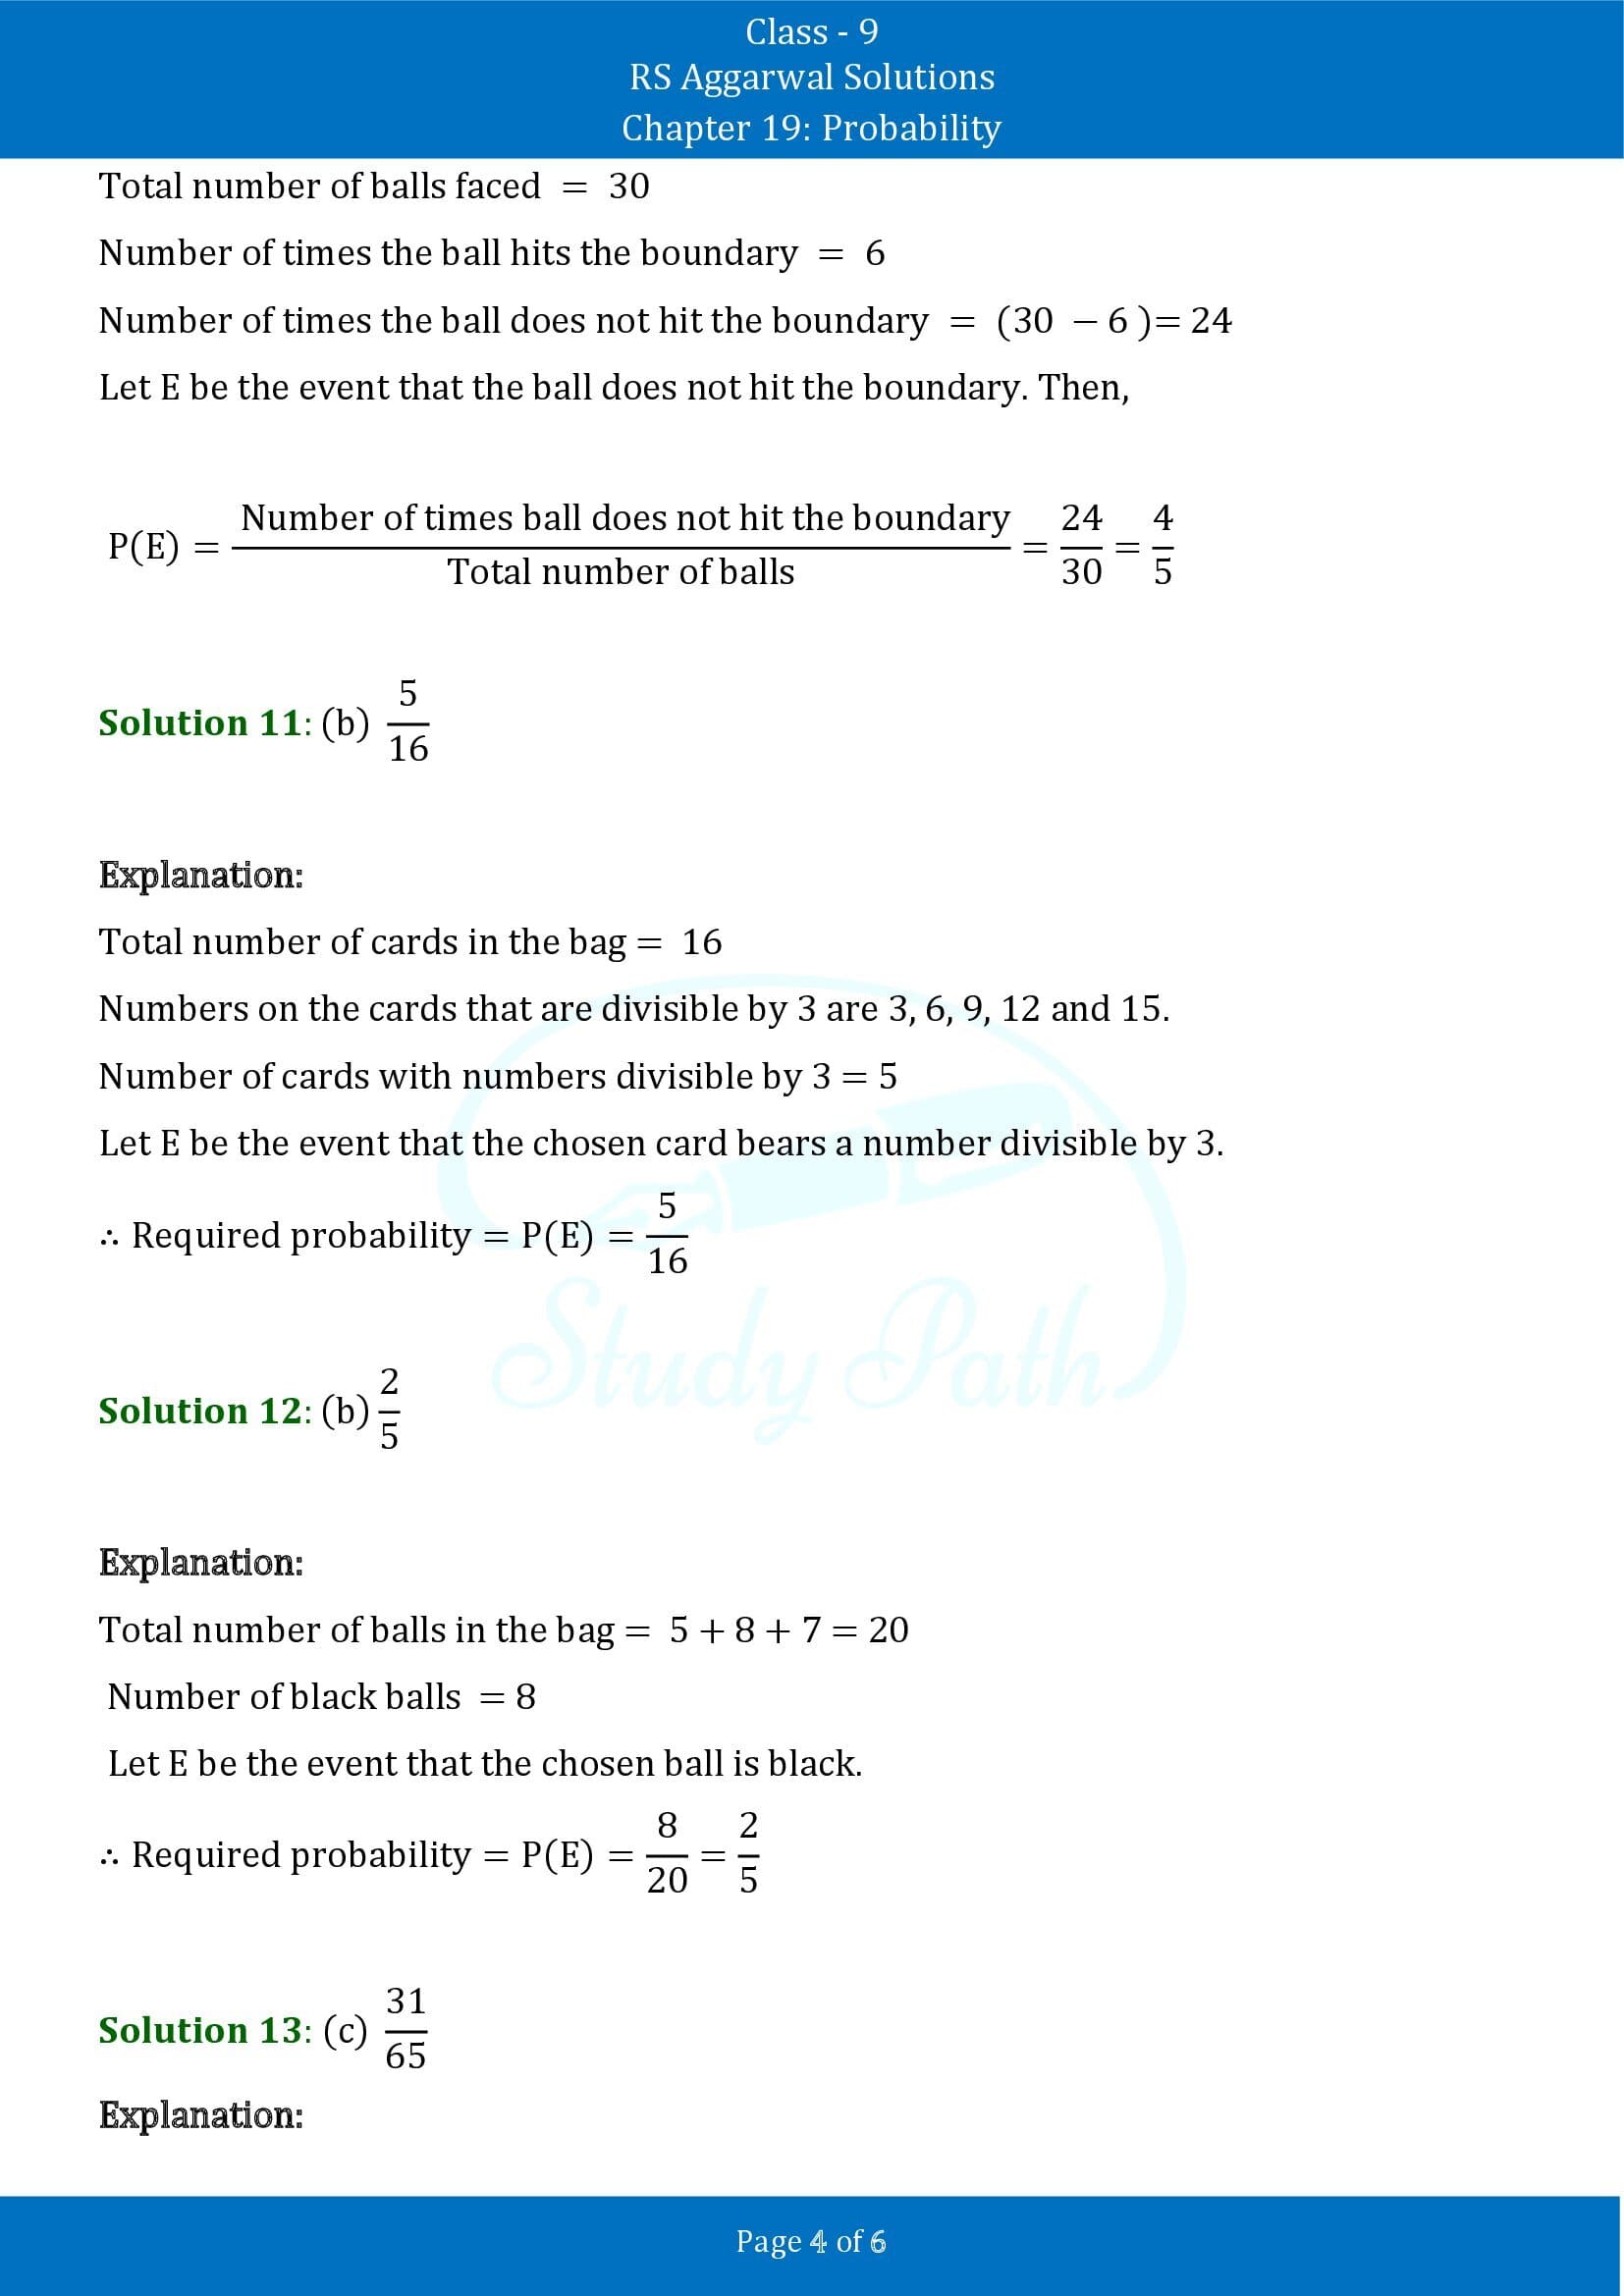 RS Aggarwal Solutions Class 9 Chapter 19 Probability Multiple Choice Questions MCQs 00004